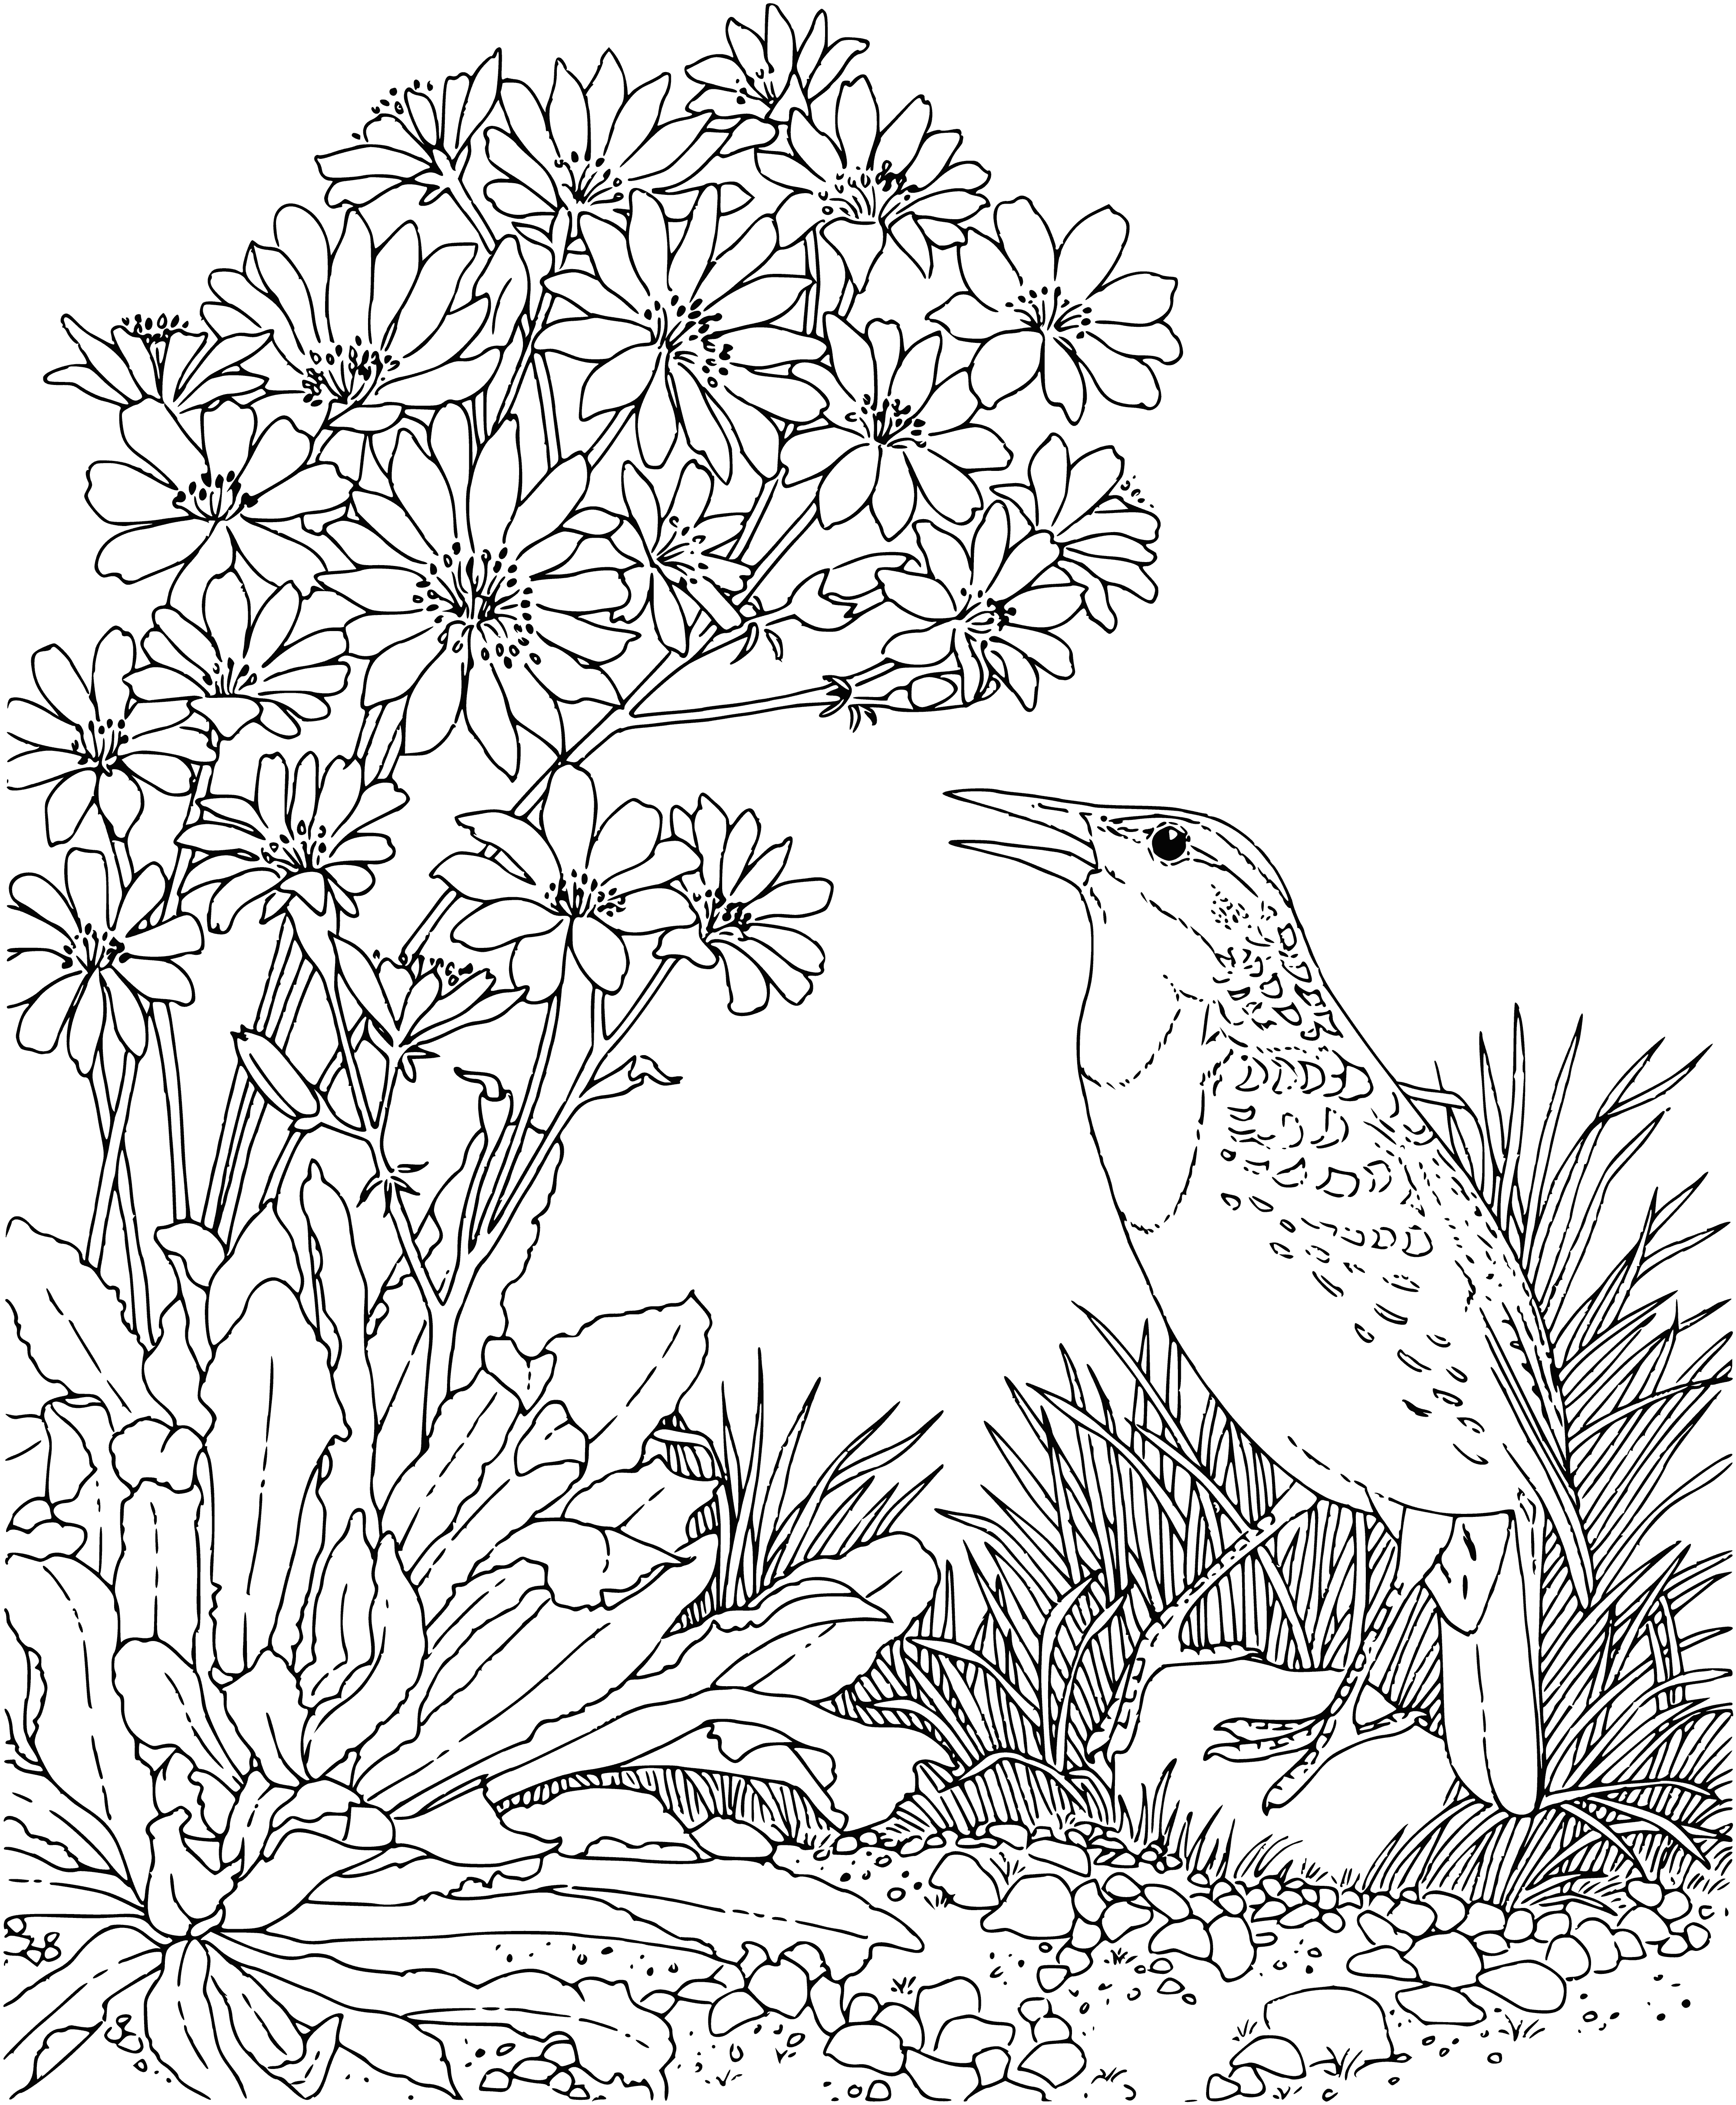 coloring page: Meadowlark is small-medium sized, brown w/black streaks, light brown belly w/dark streaks, "V" on forehead, yellow breast w/black "V", black beak. Found in fields/meadows, eats insects/seeds. #wildlifecoloring pagegraphy #nature